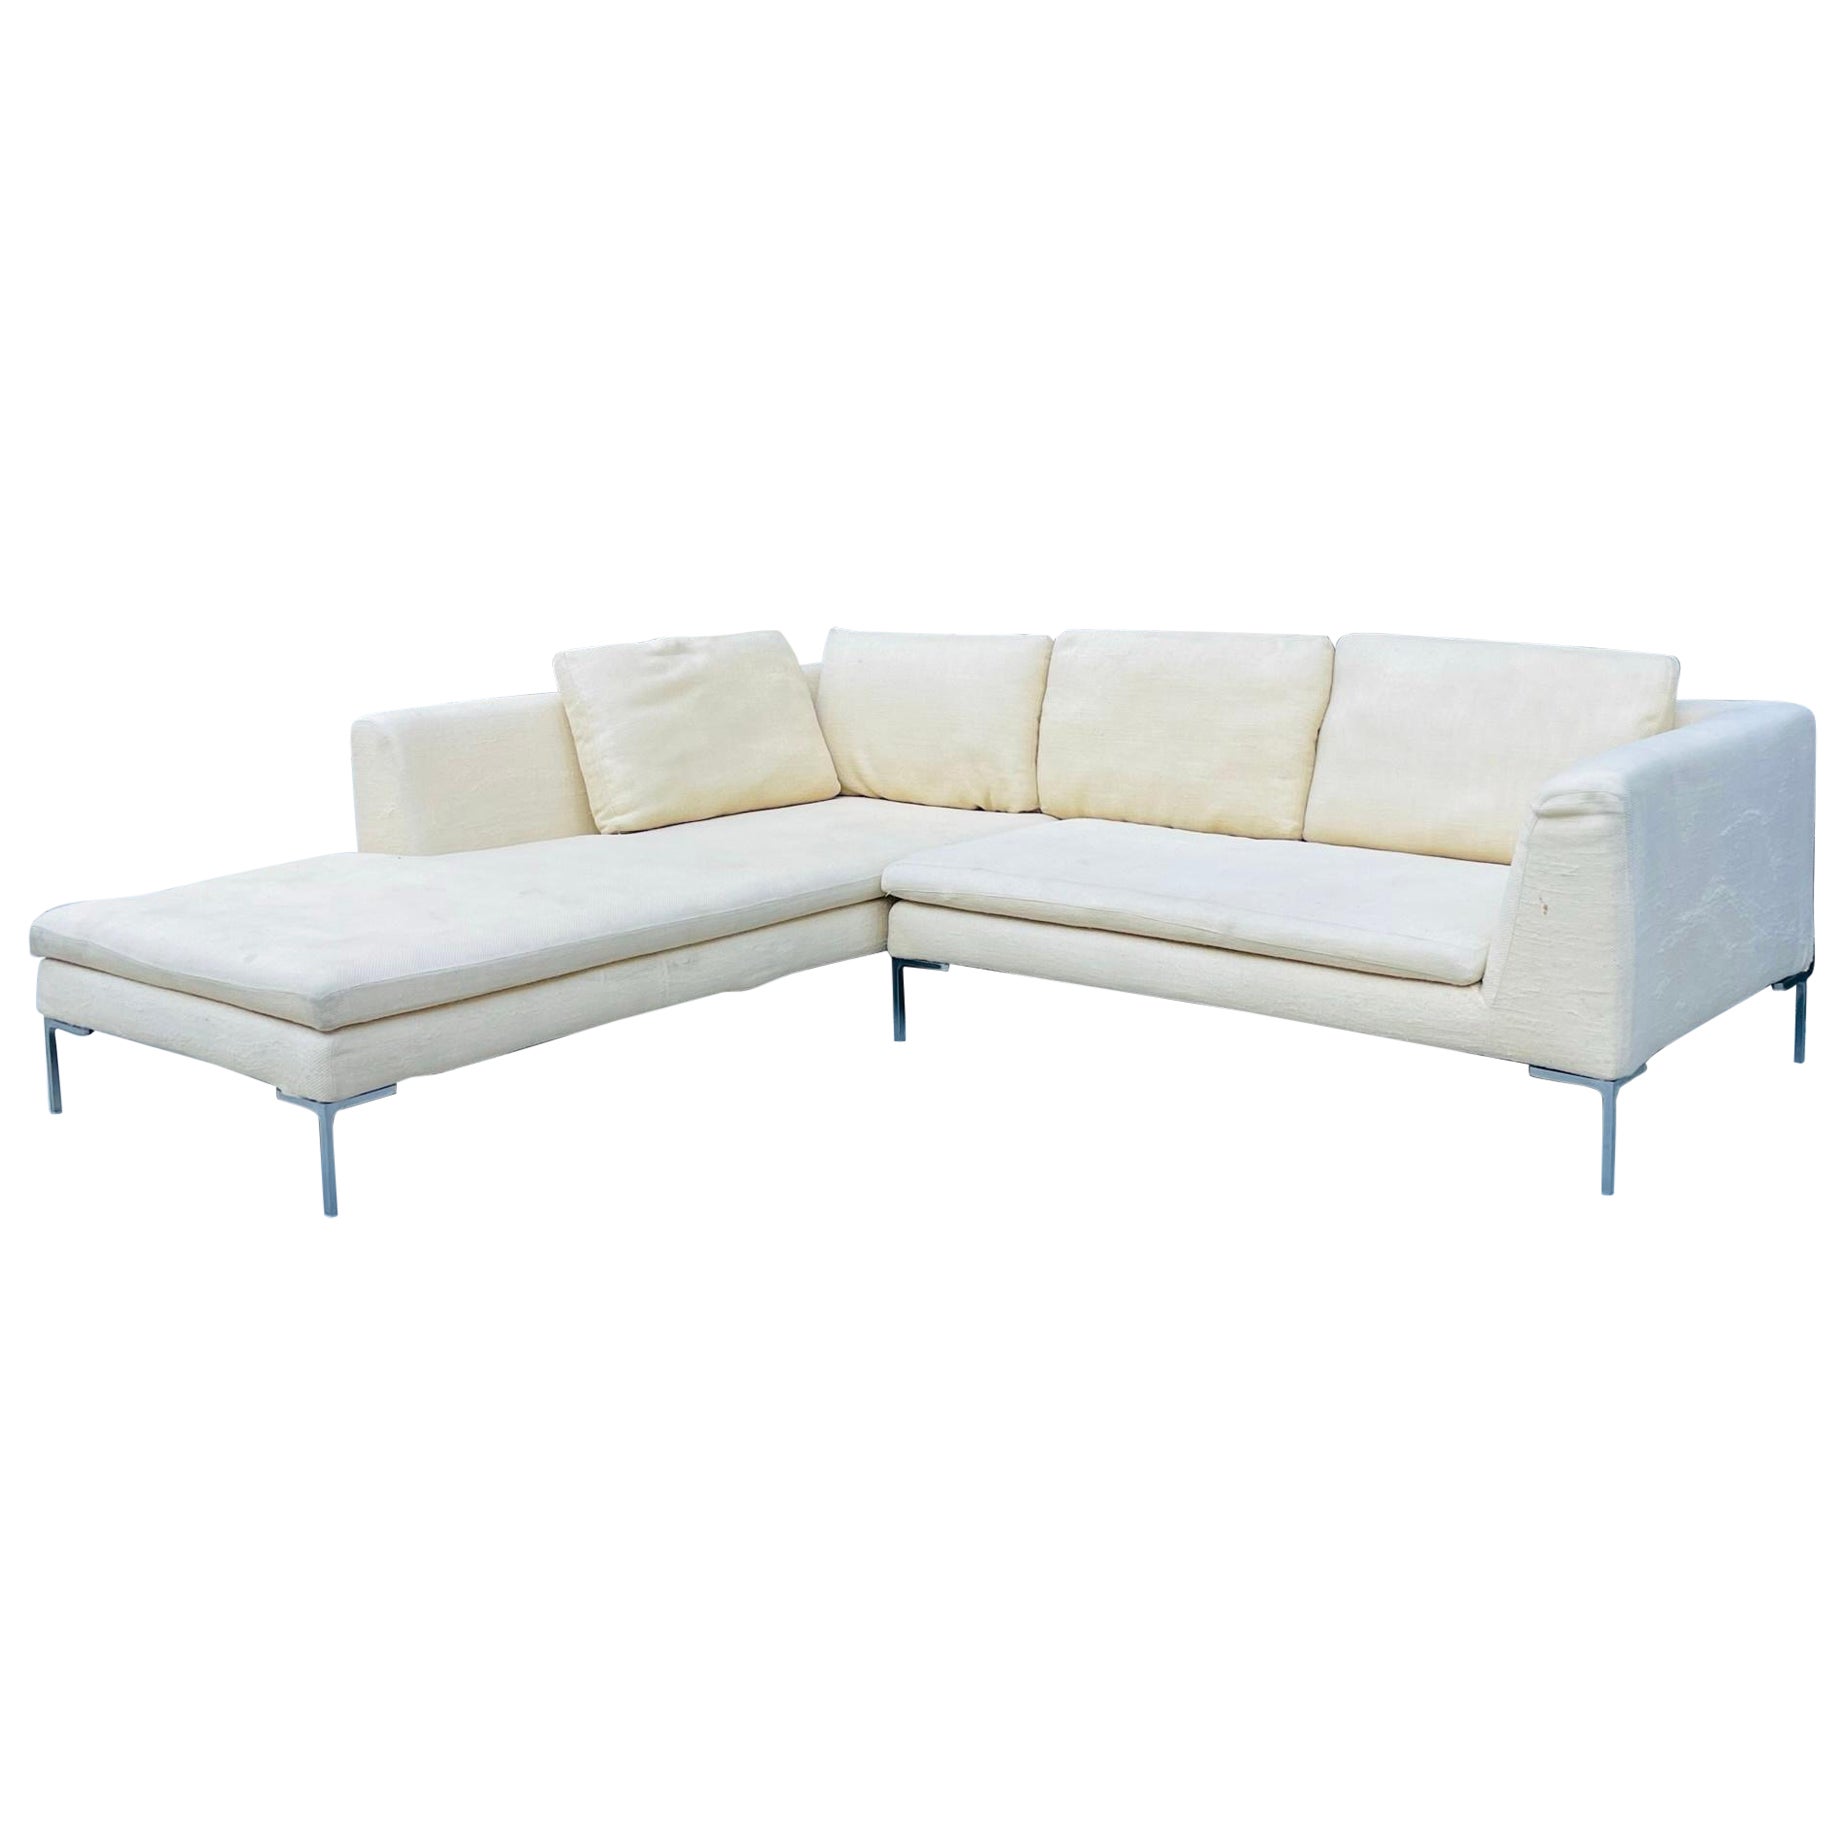 Charles Sectional Sofa by Antonio Citterio for B&B Italia. For Sale